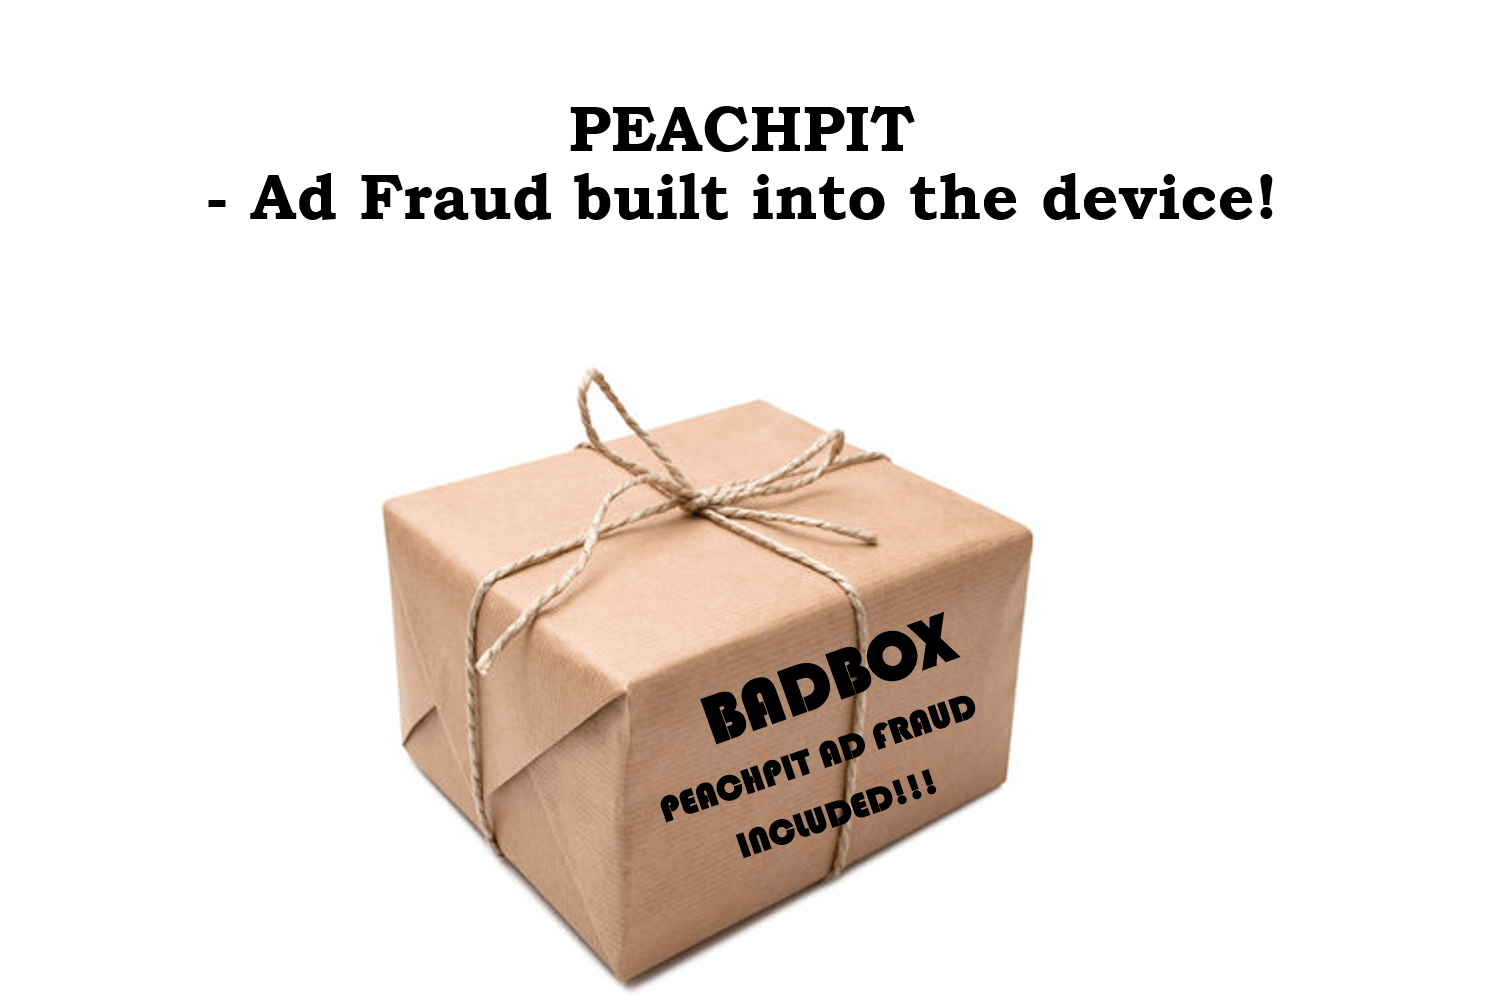 PEACHPIT - Ad Fraud built into the device!